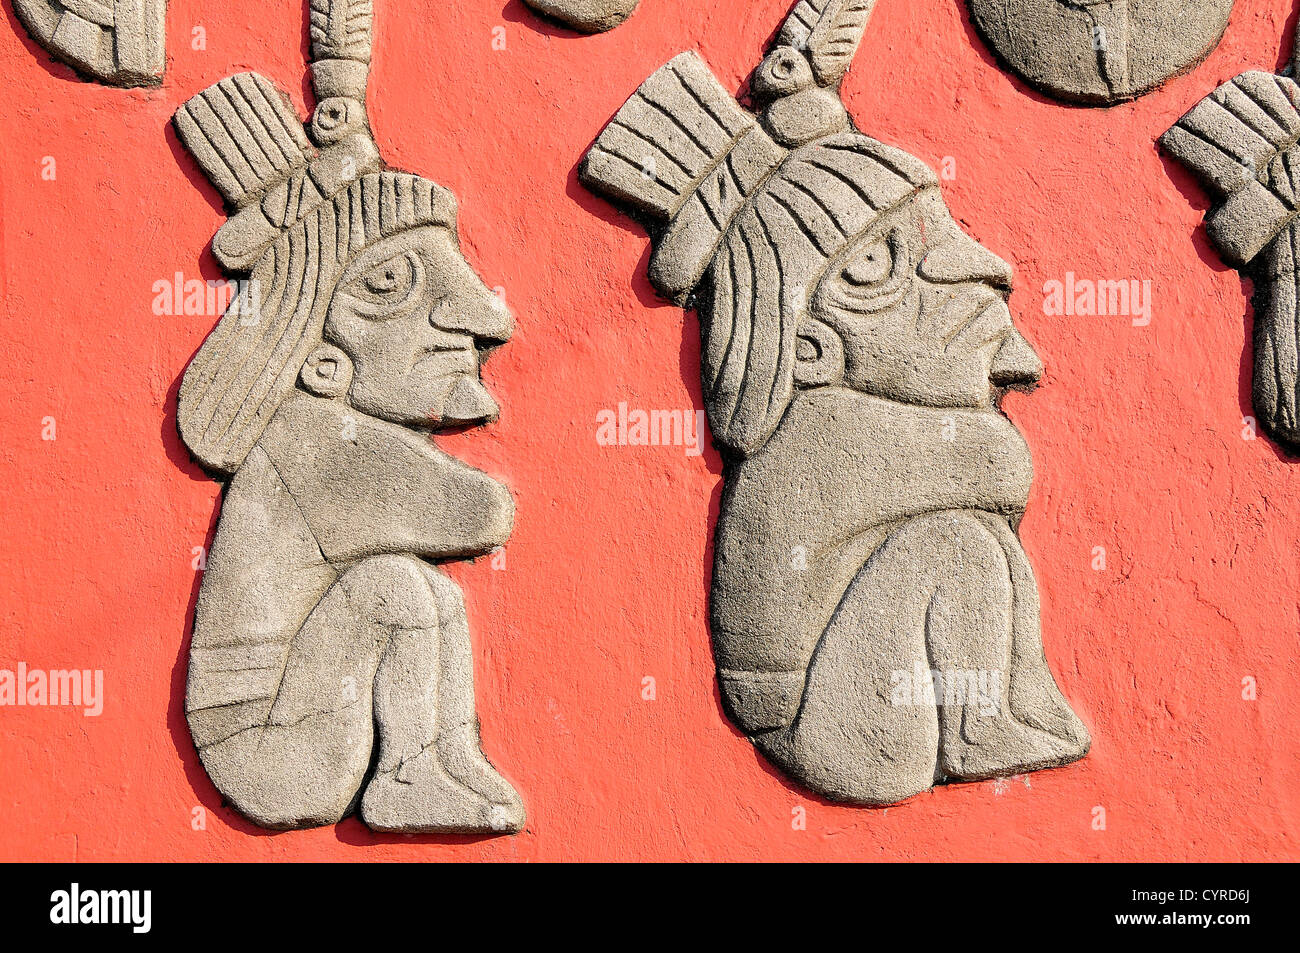 Relief carving of Totonac figures on the Mural Cultural Totonaca in the Zocalo. American  Hispanic Latin America Latino Mexican Stock Photo